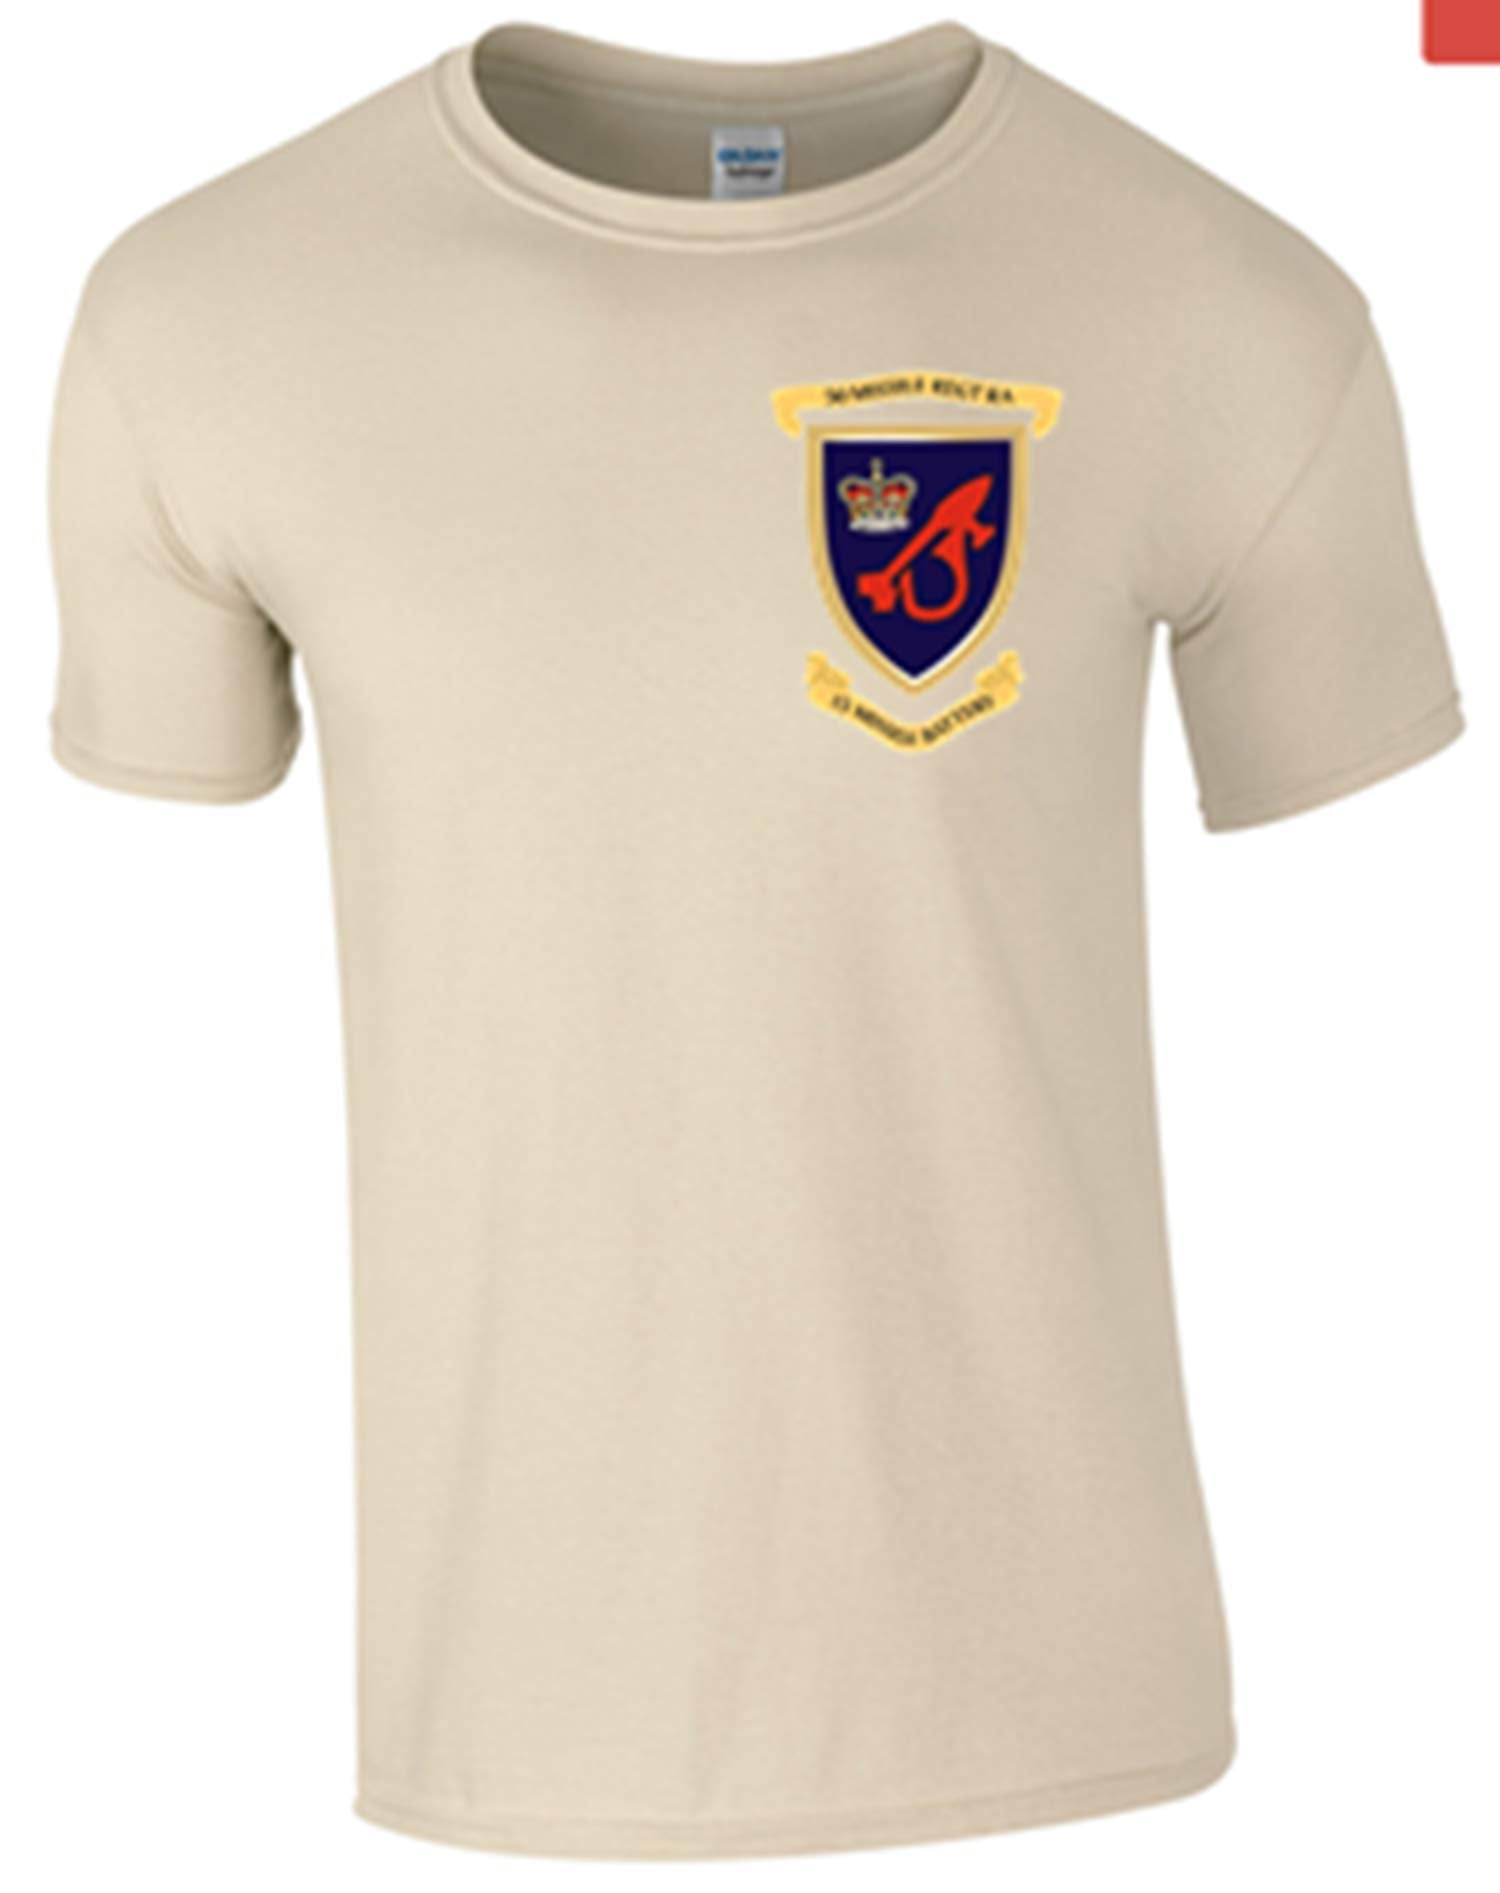 Army 1157 Kit Ministry of Defence T-Shirt 50 Missile Regiment with 15 Battery RA Logo on - Army 1157 kit Sand / XXL Army 1157 Kit